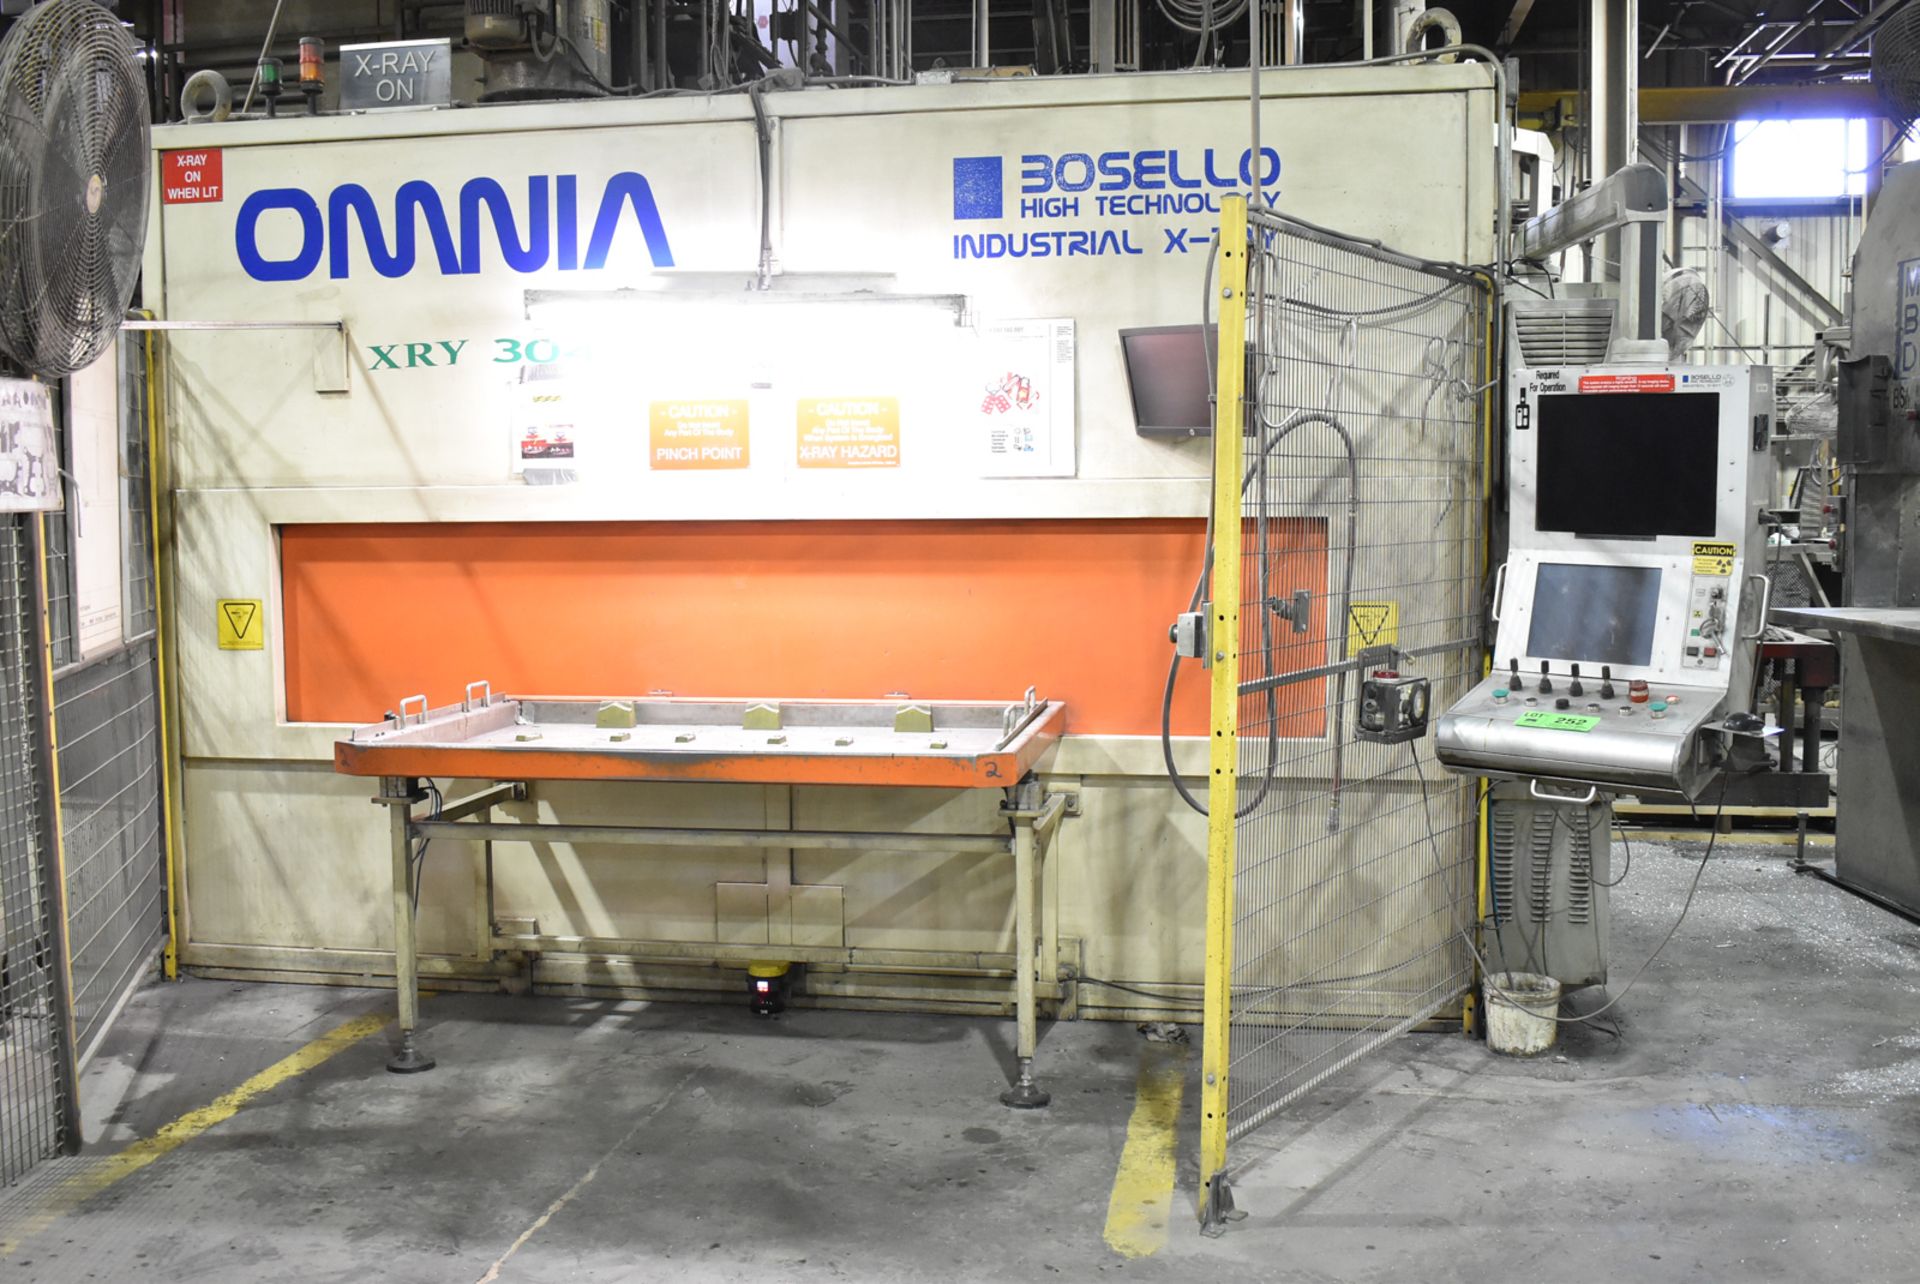 BOSELLO (2014) OMNIA 160/100 INDUSTRIAL X-RAY INSPECTION MACHINE WITH BHT PC BASED CONTROL AND - Image 2 of 7